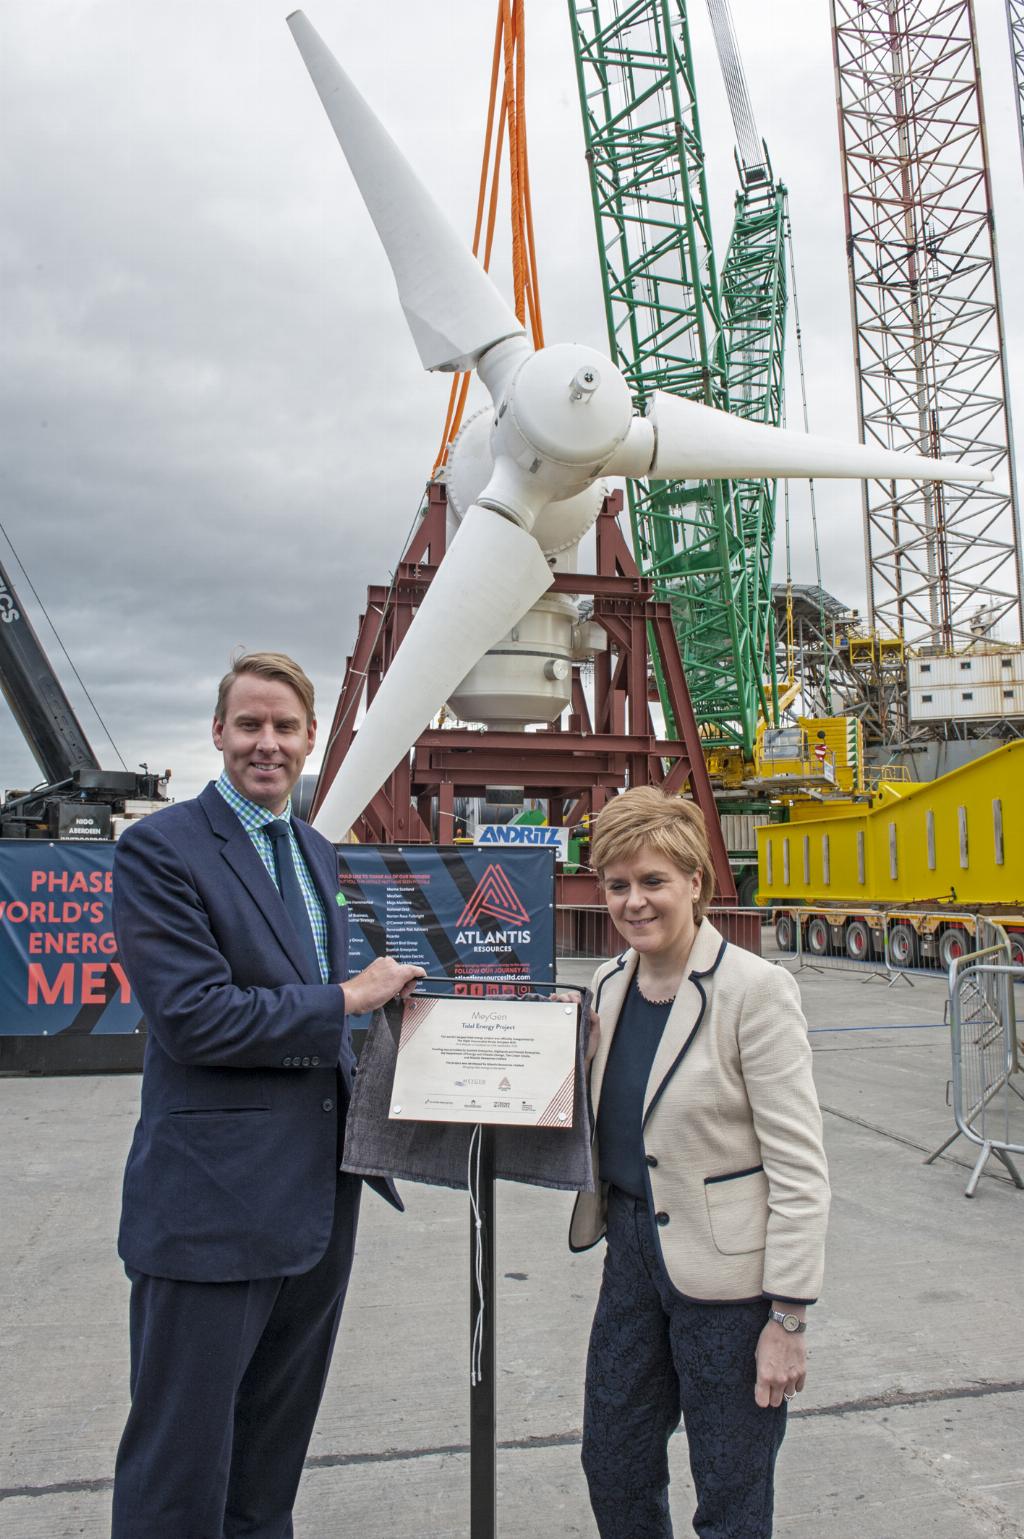  The first 1.5MW turbine was delivered to the Nigg Energy Park on September 11th in a ceremony attended by First Minister, Nicola Sturgeon